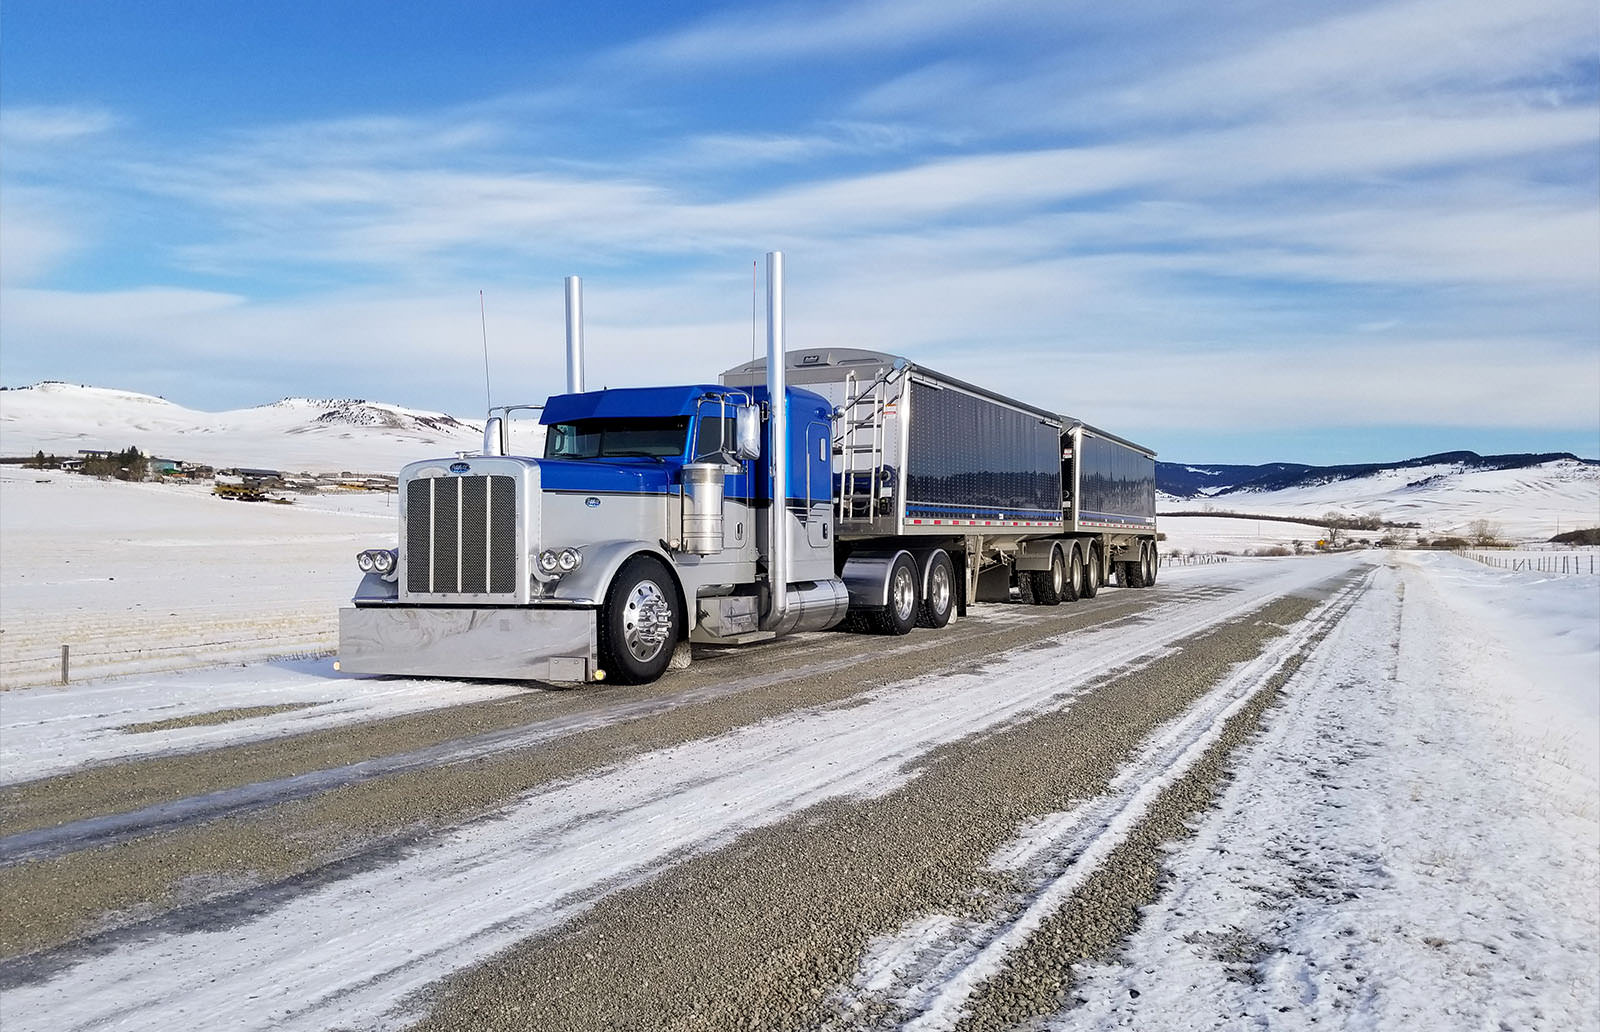 2021 Winner: Ted McClung – Southern Alberta back roads